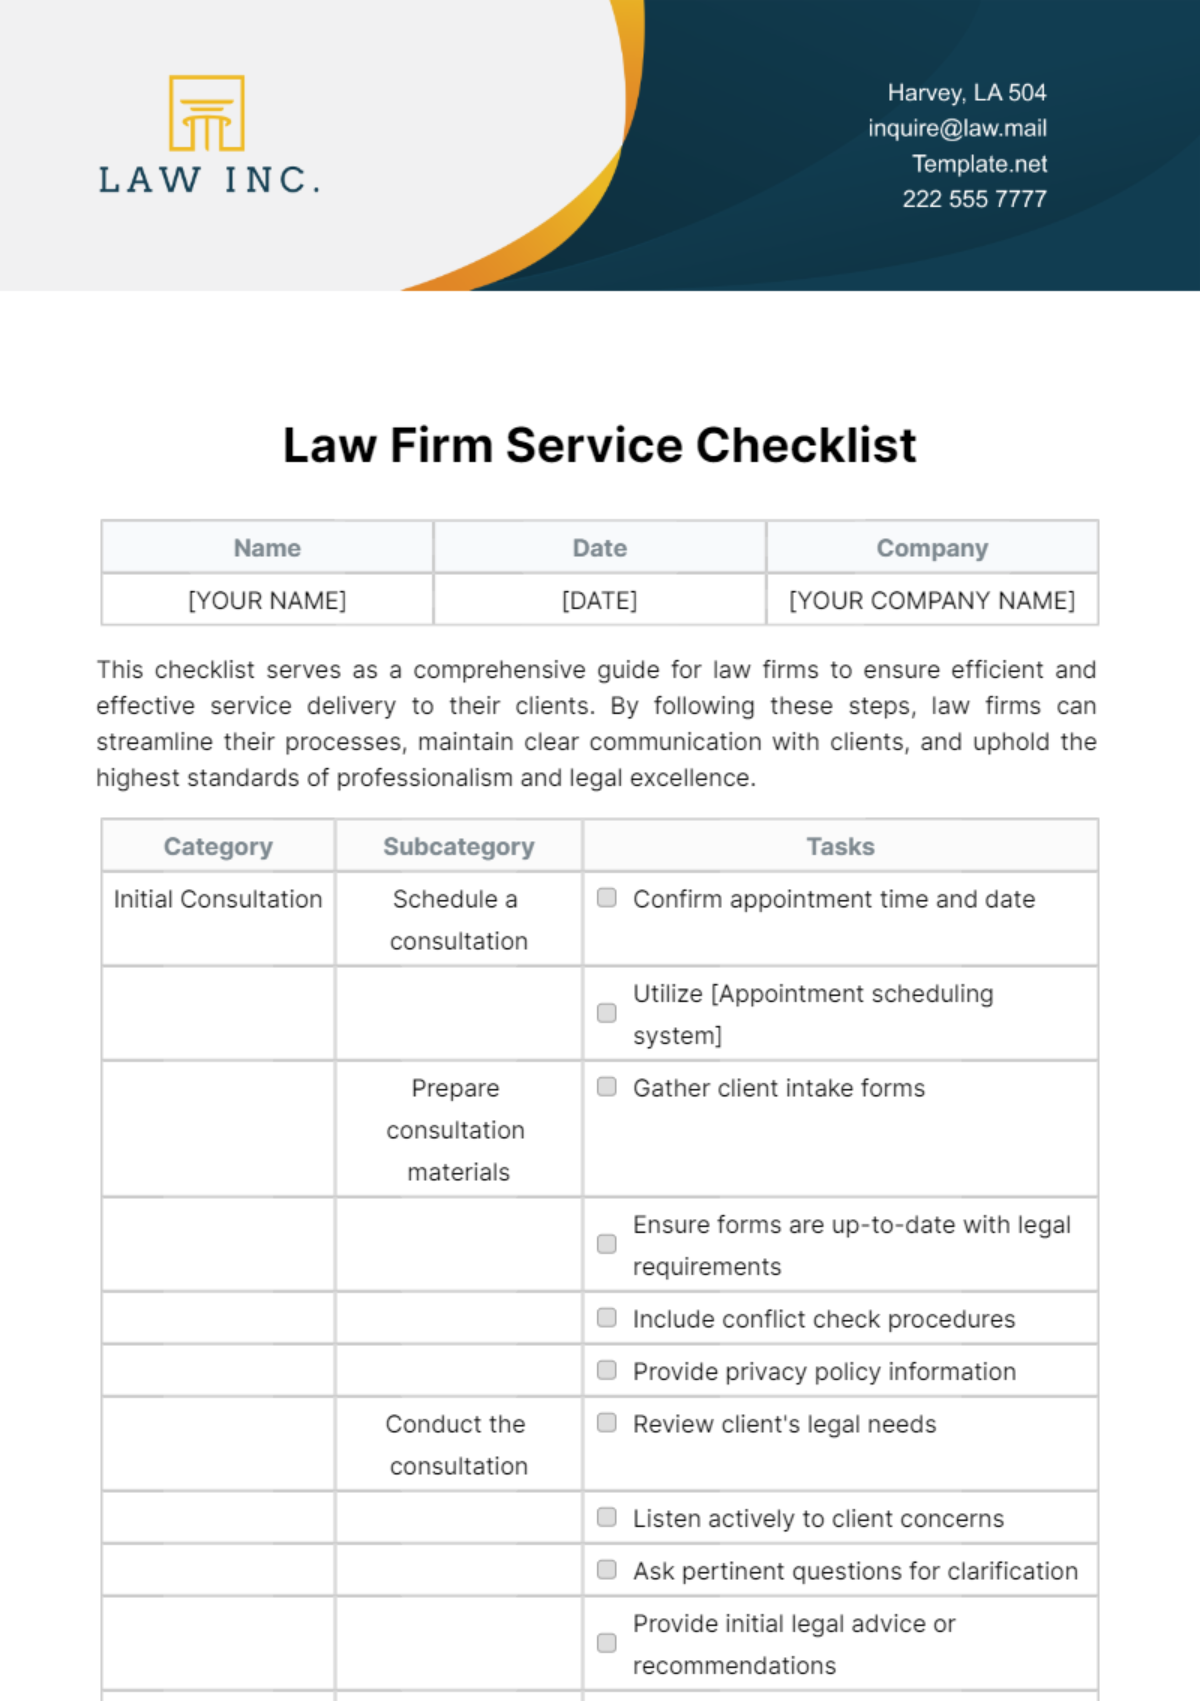 Law Firm Service Checklist Template